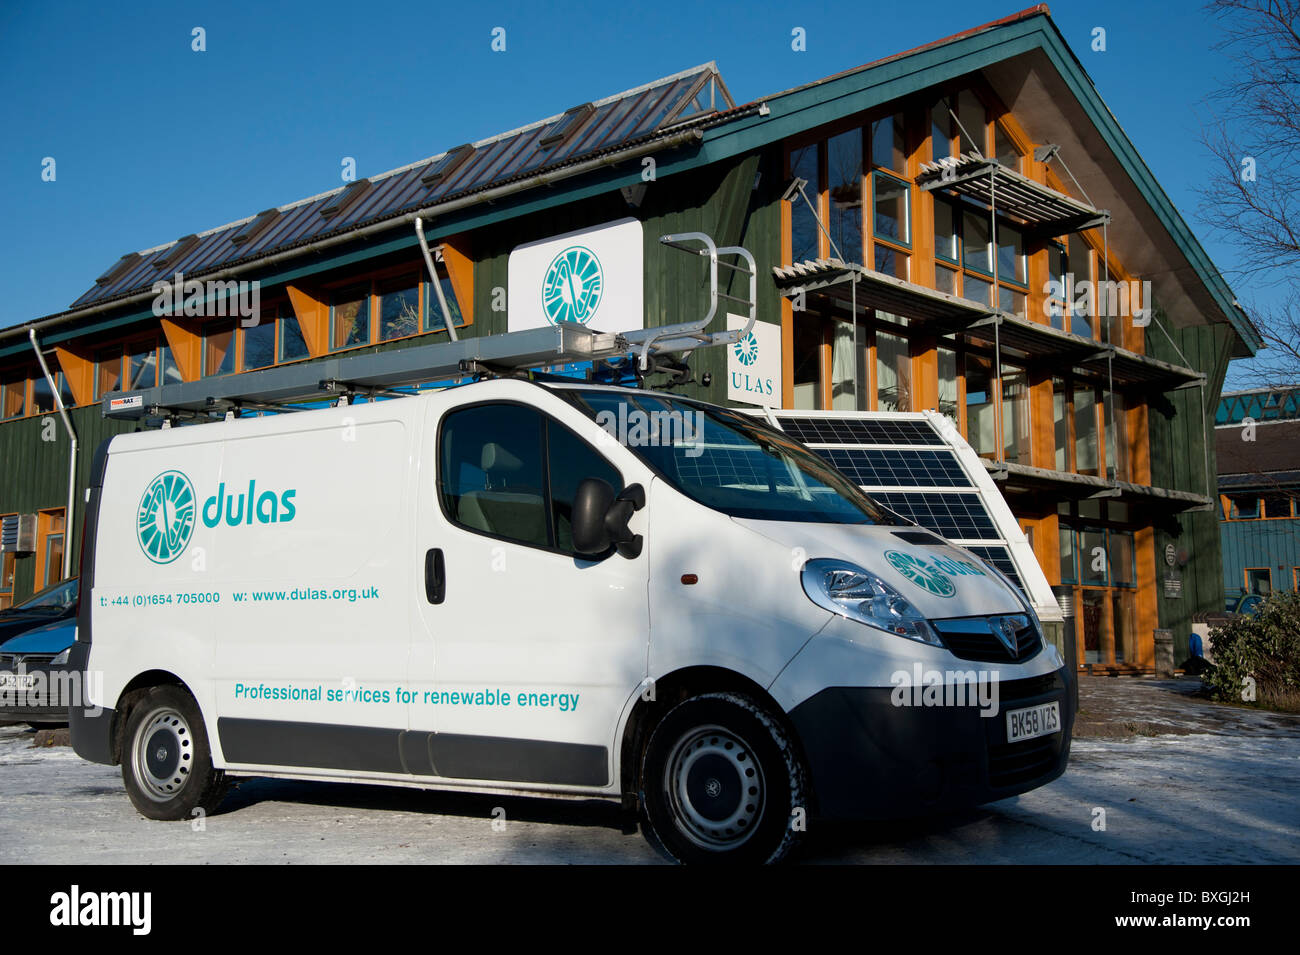 DULAS - professional services for renewable energy, Machynlleth Wales UK Stock Photo